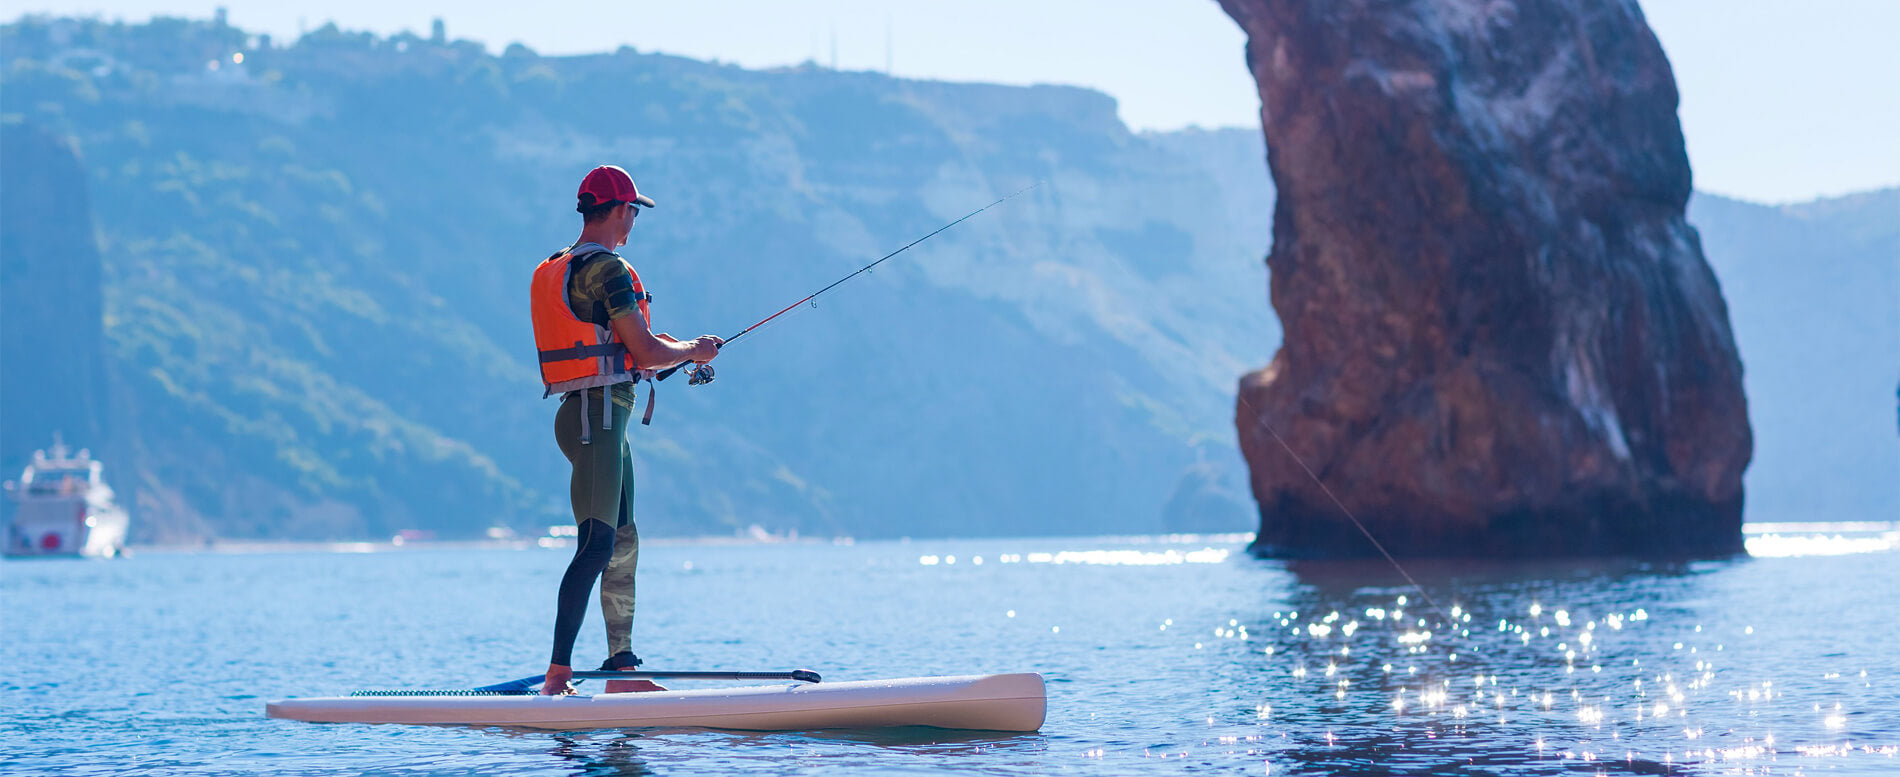 The 9 Best Fishing Life Jackets for Paddle Boarders